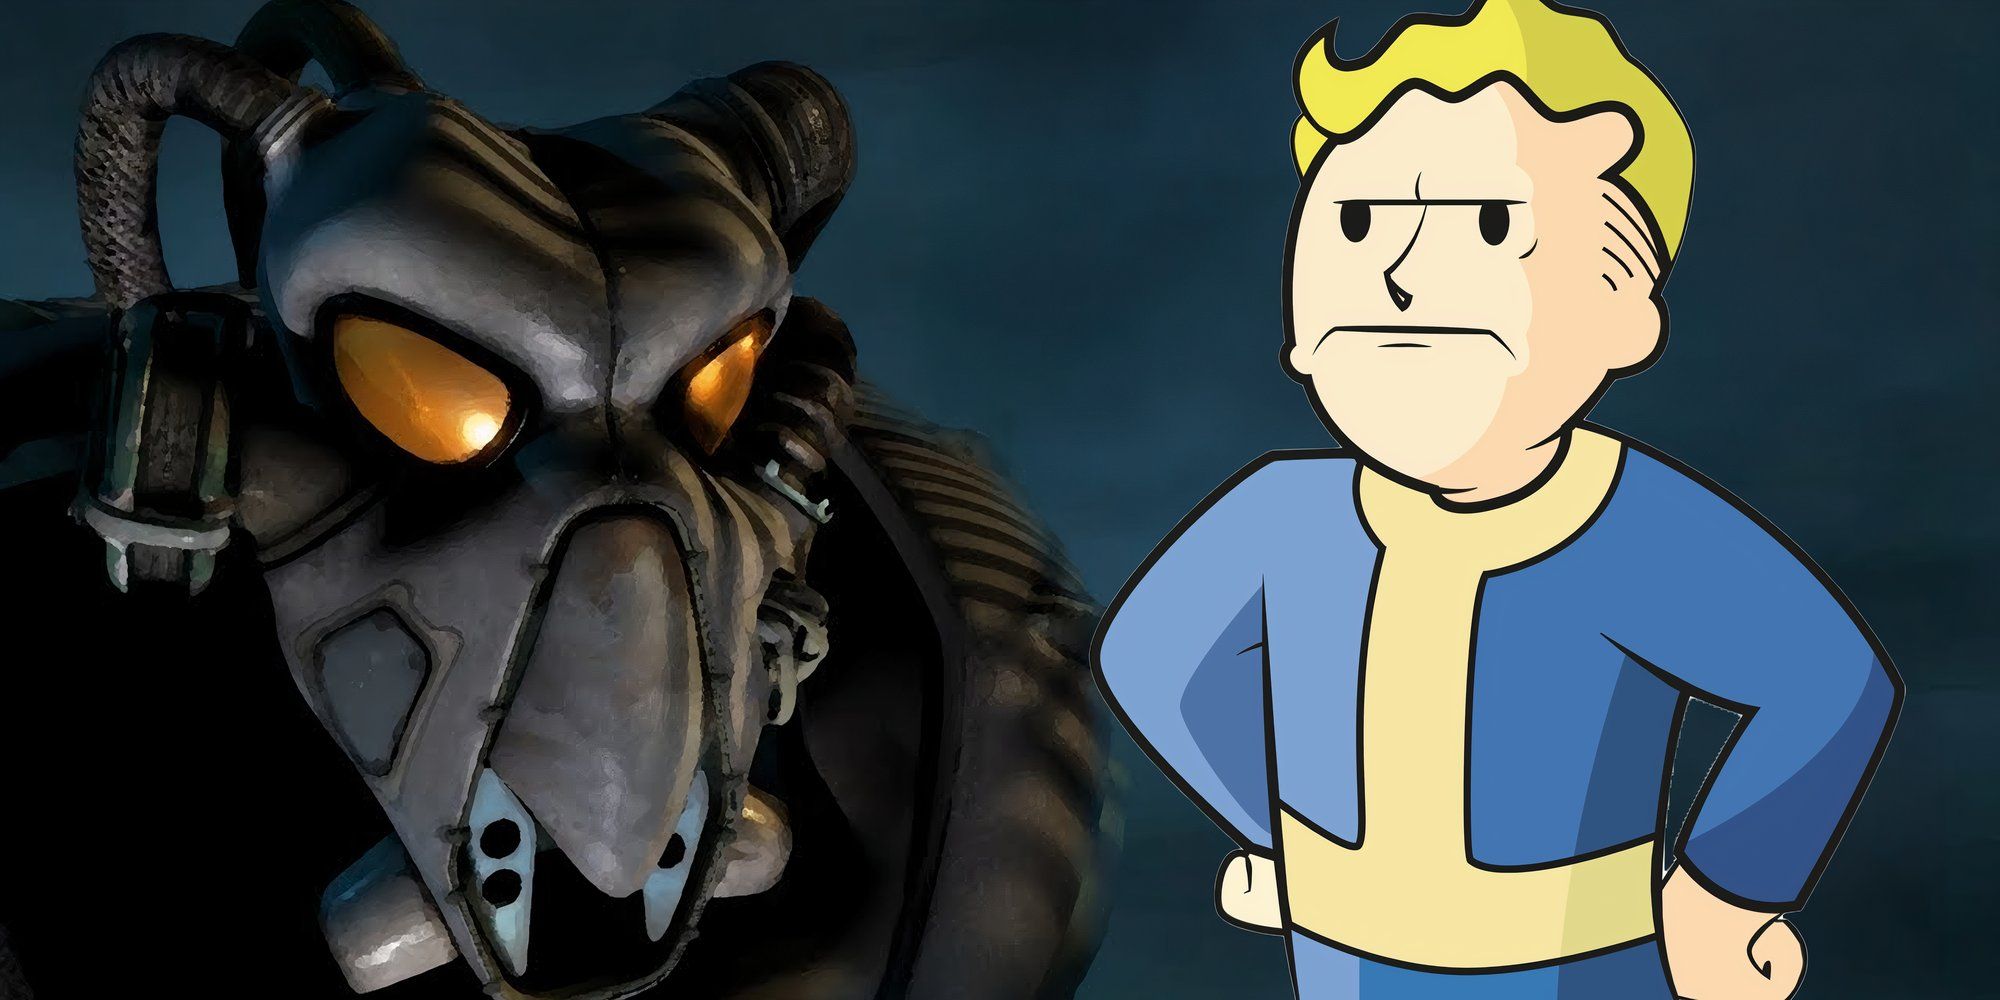 Fallout - Fallout 2 cover art with grumpy Vault boy